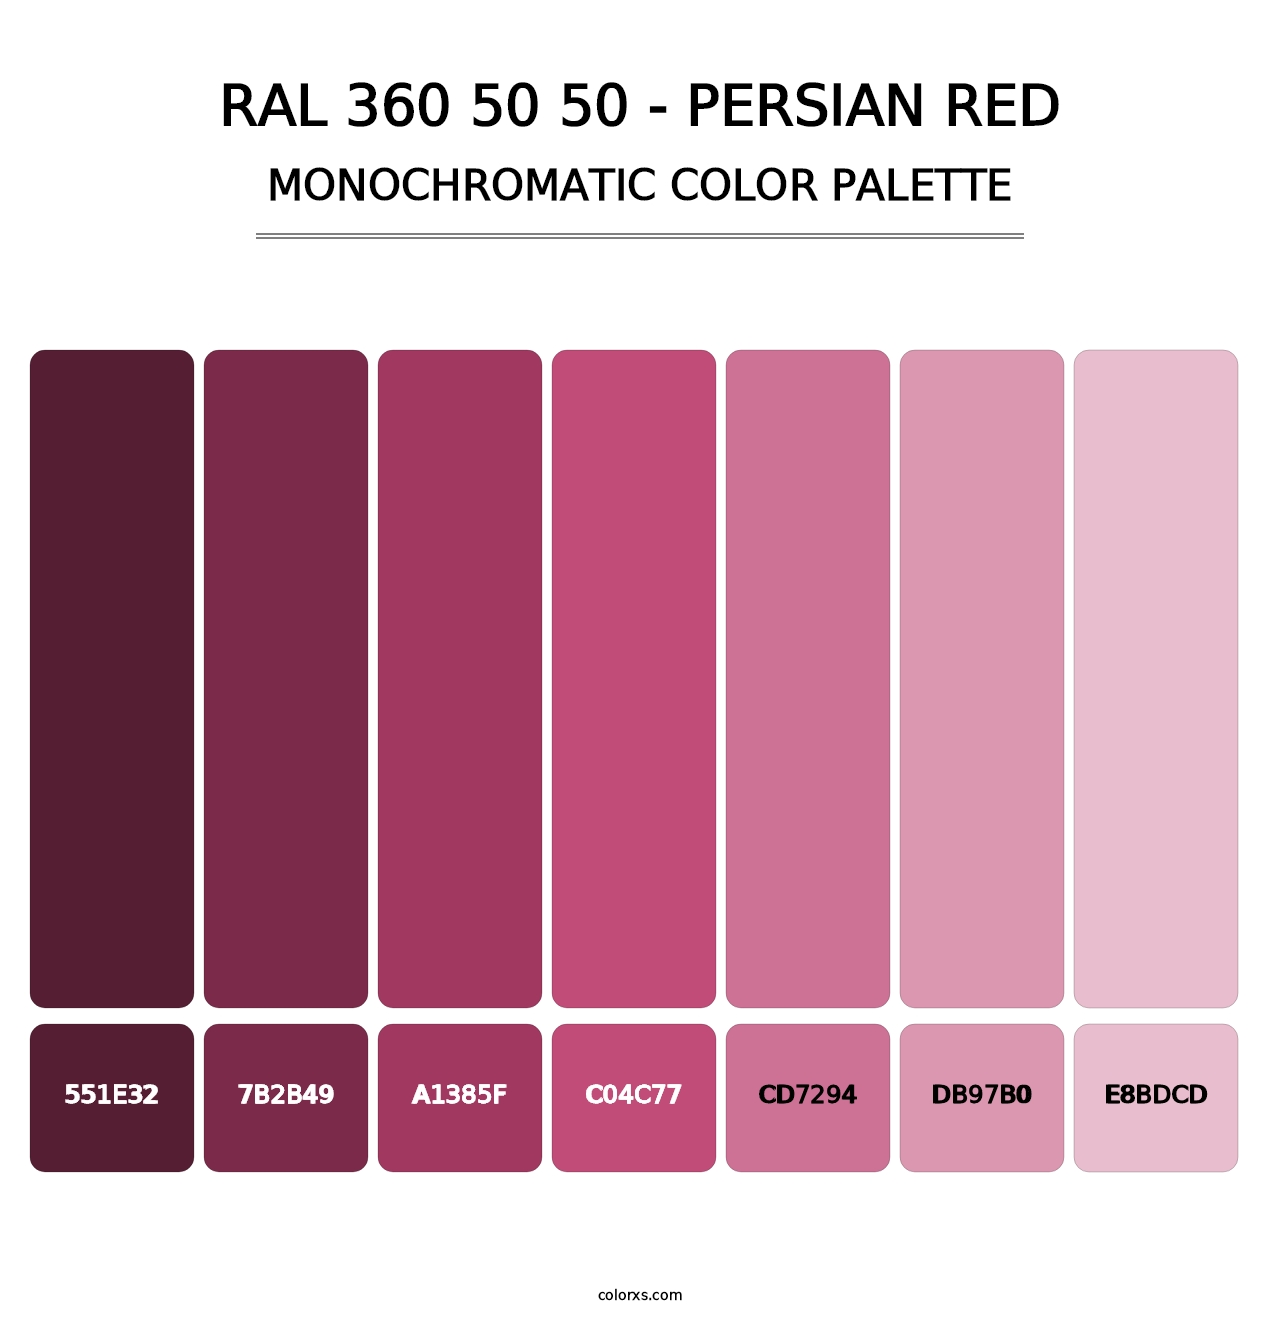 RAL 360 50 50 - Persian Red - Monochromatic Color Palette